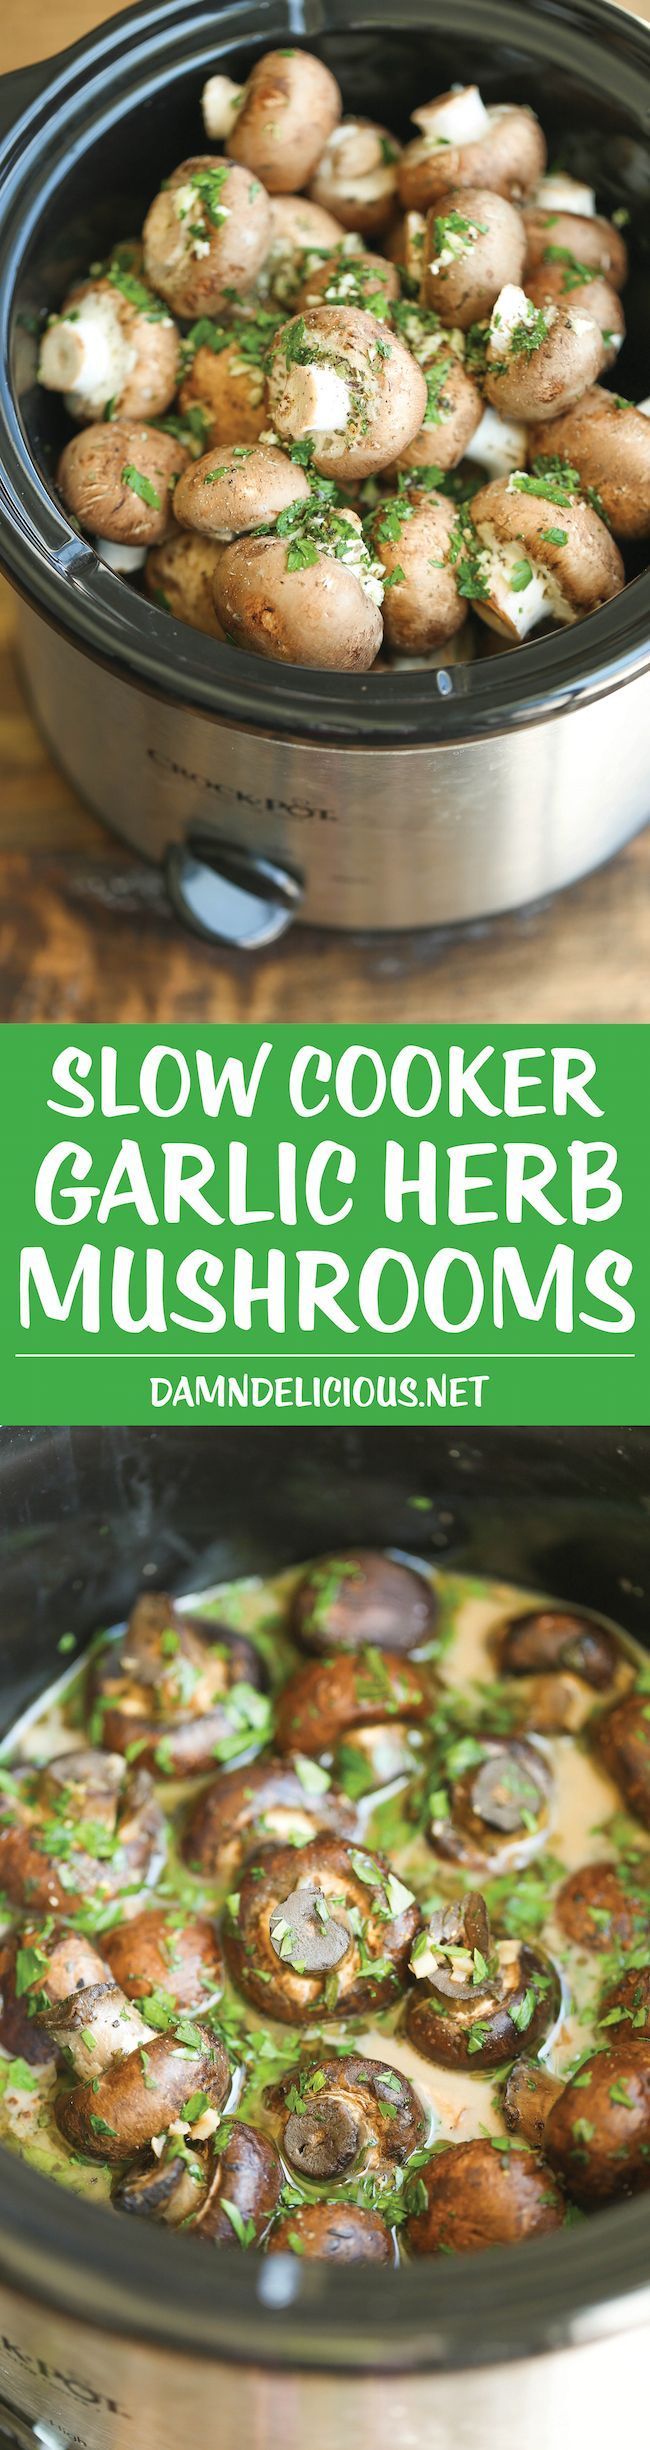 Slow Cooker Garlic Herb Mushrooms – The best and EASIEST way to make mushrooms – in a crockpot with garlic